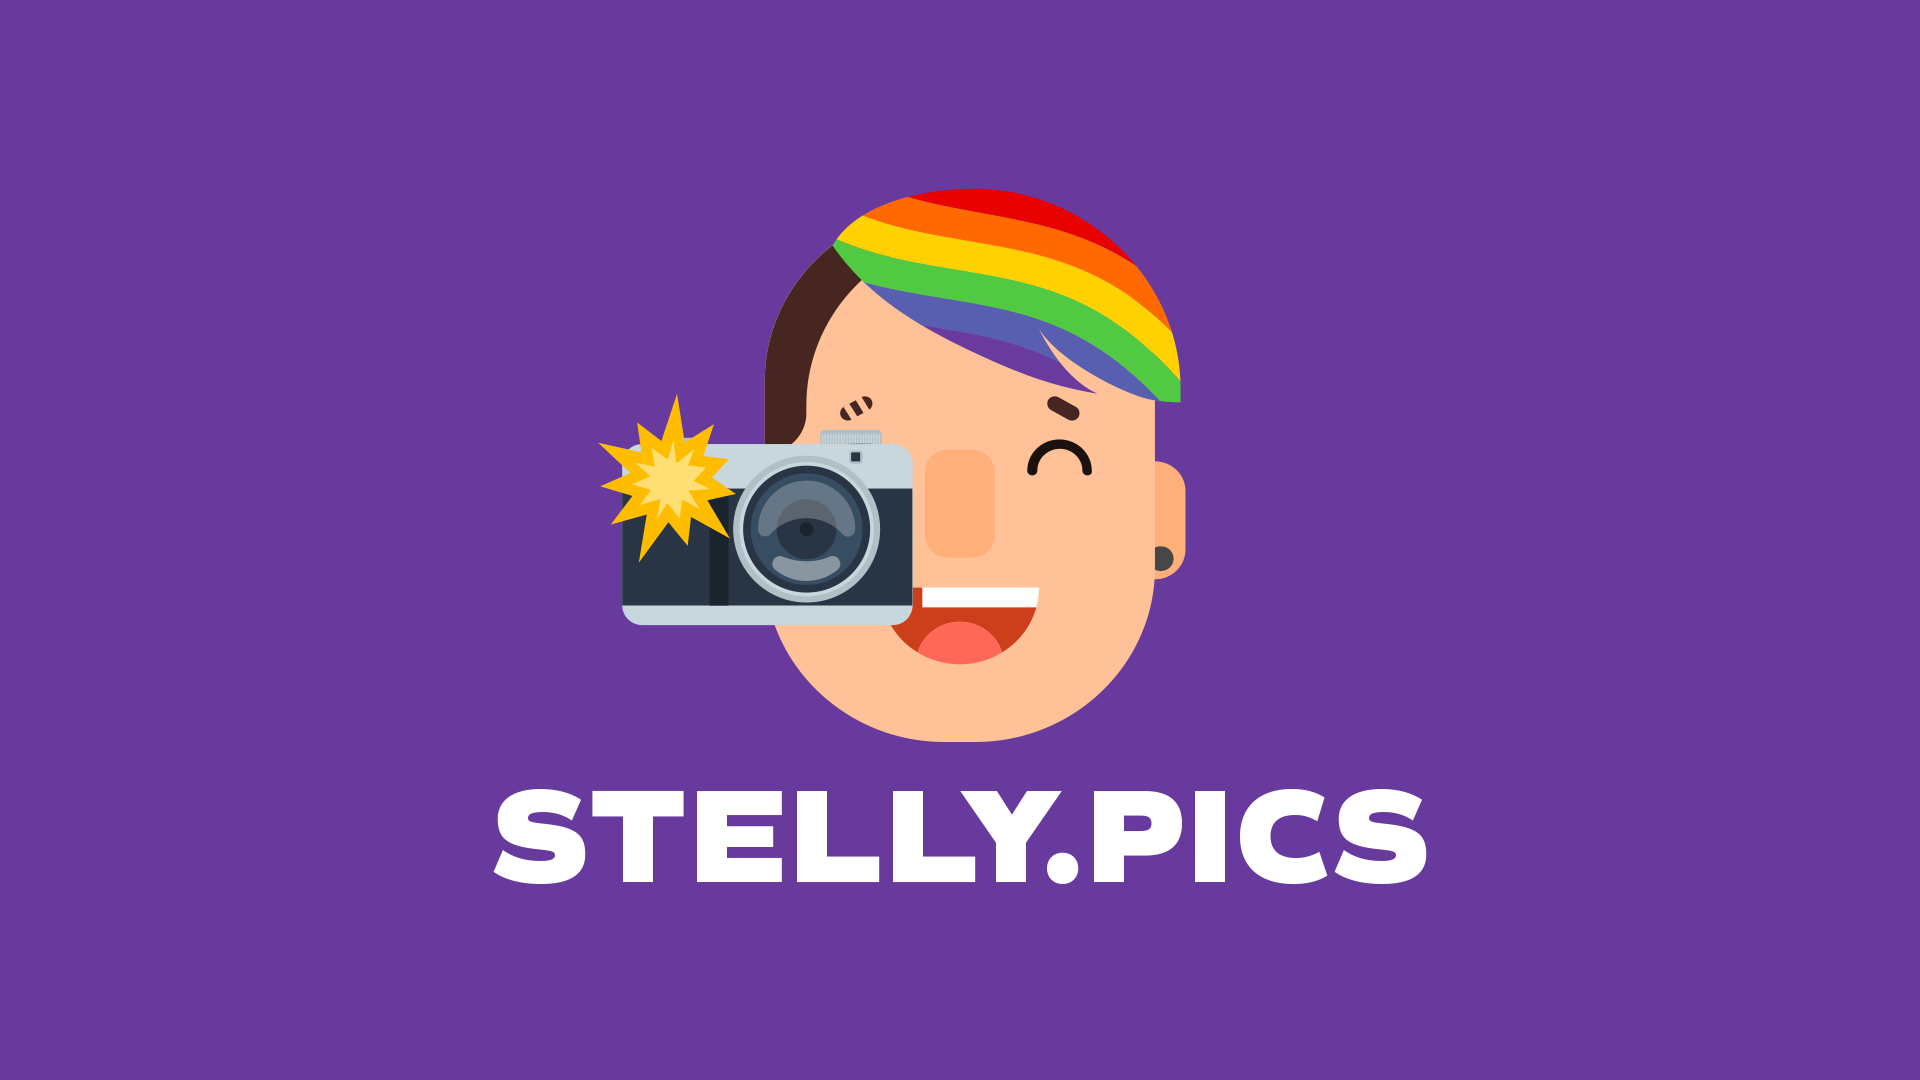 Stelly.pics — The Fandom Photography of Haley Stelly